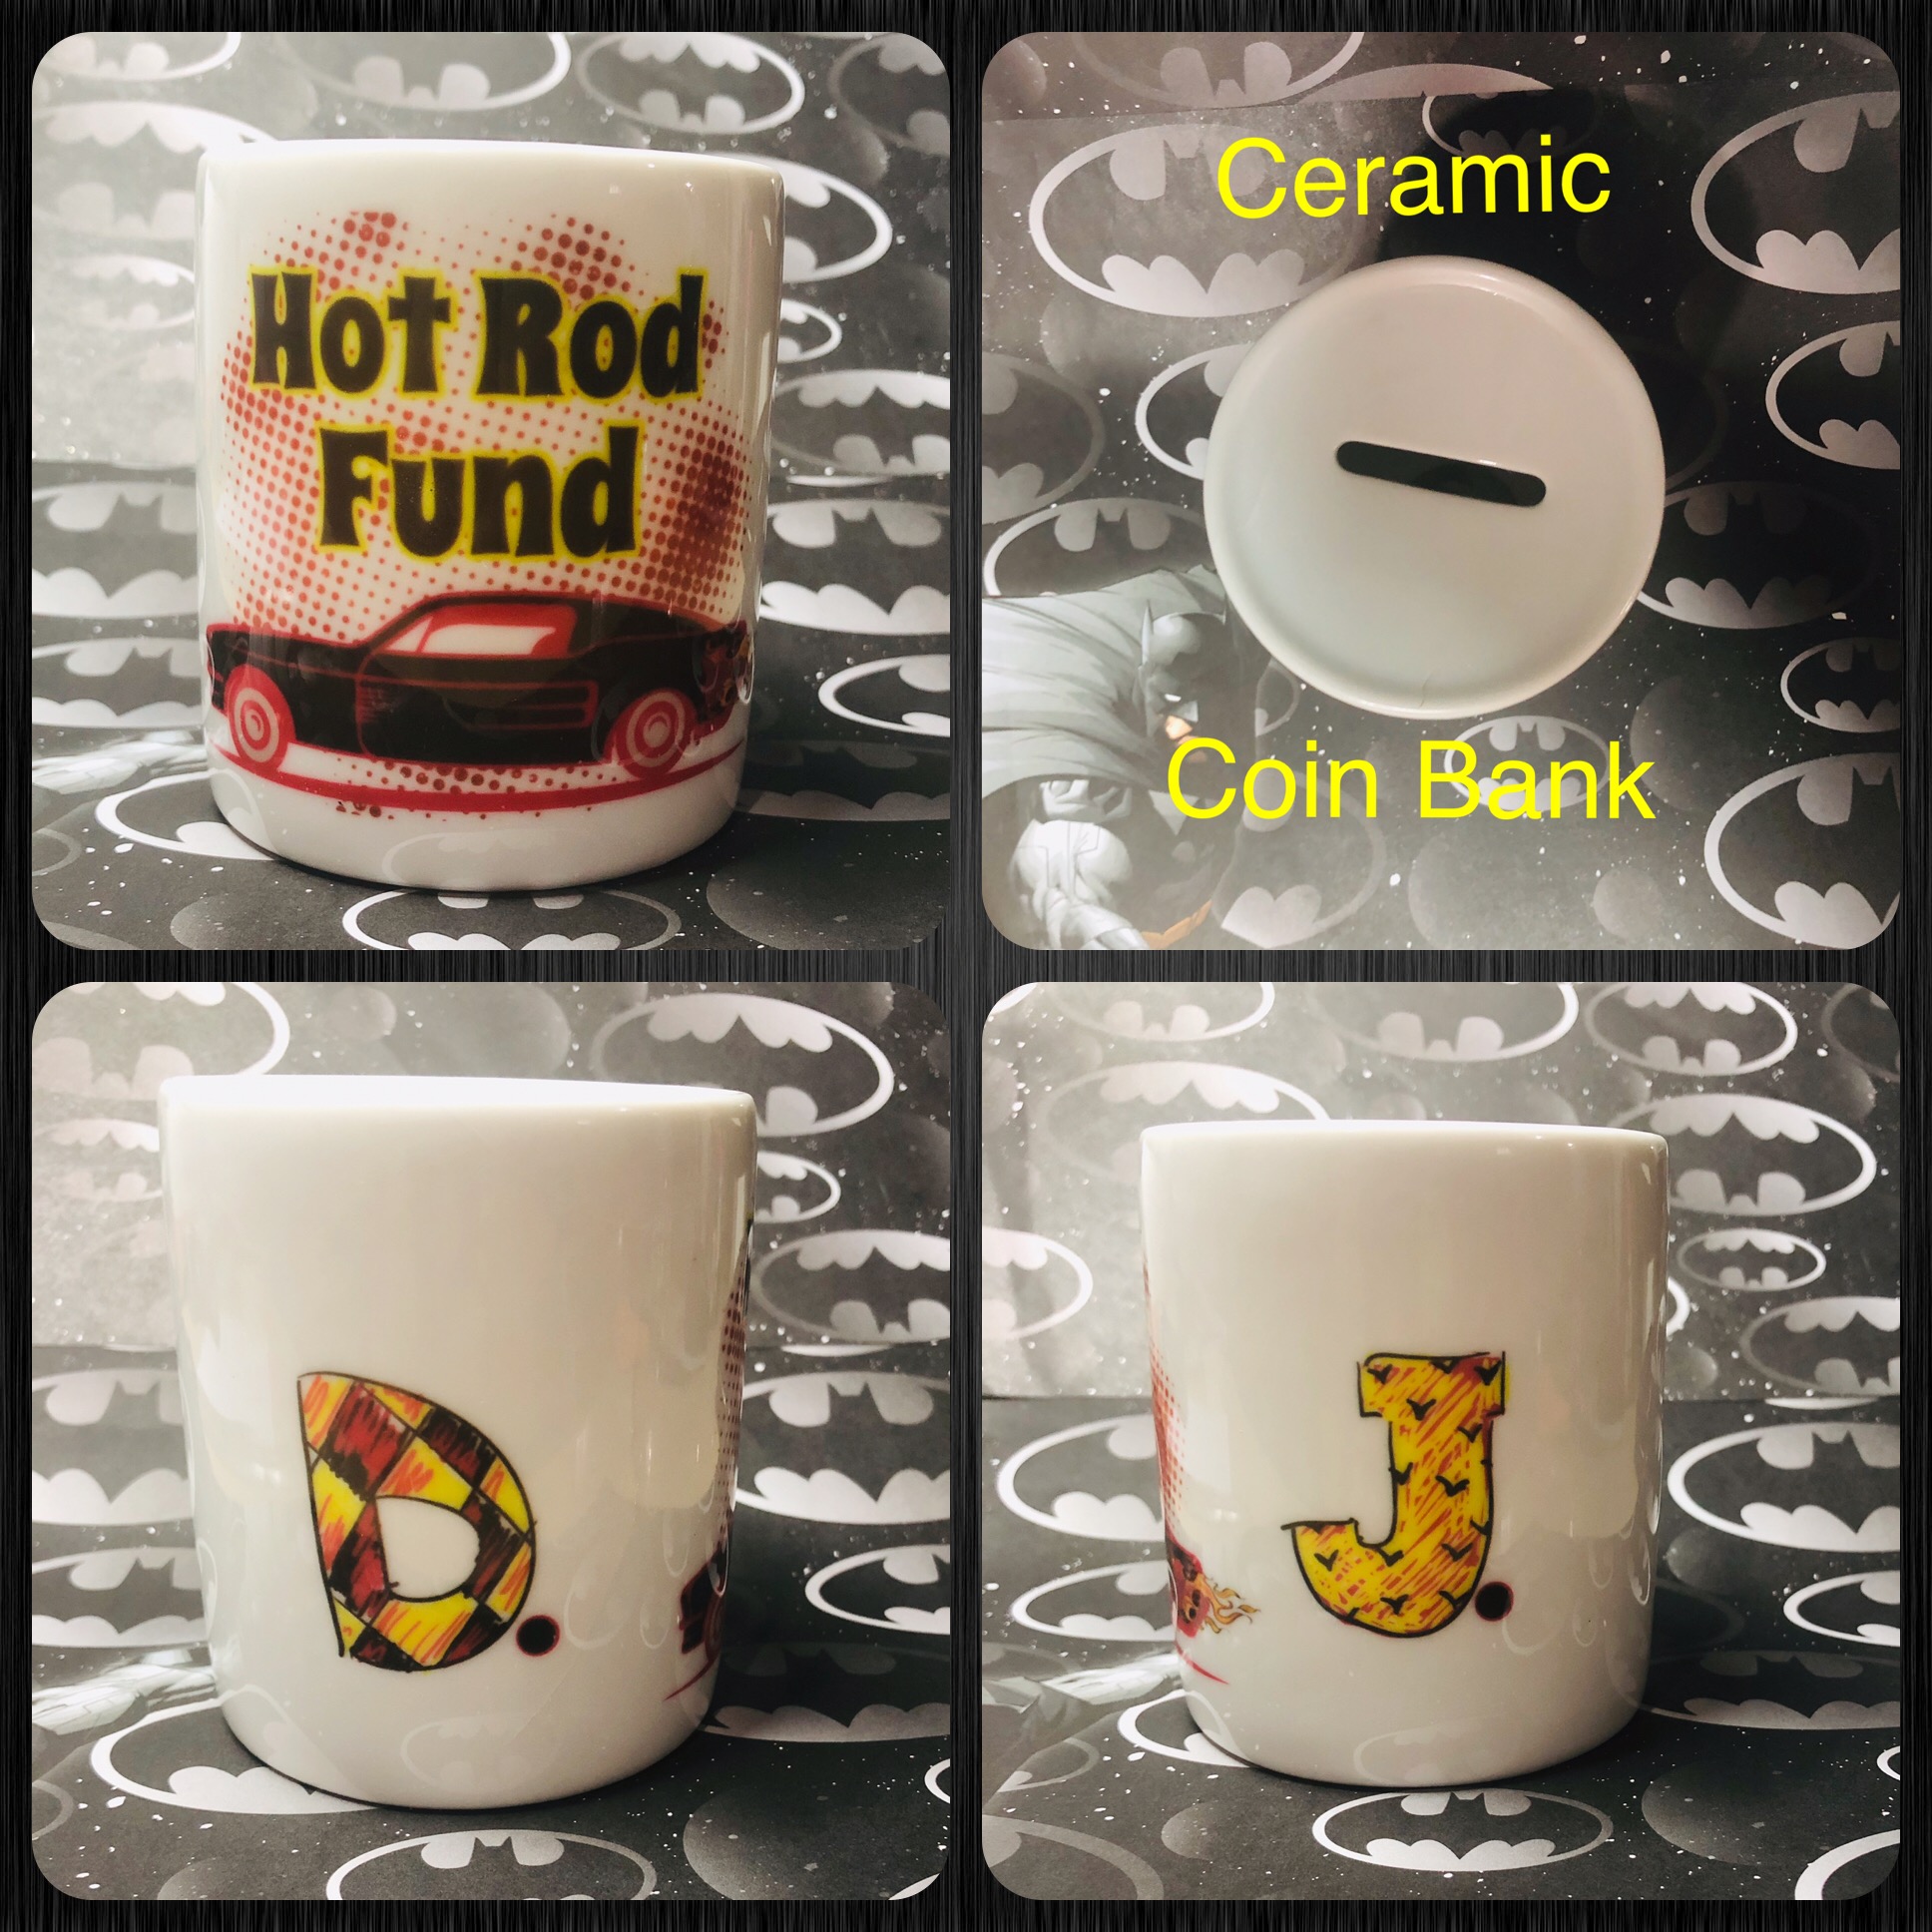 Hot Rod Fund made with sublimation printing